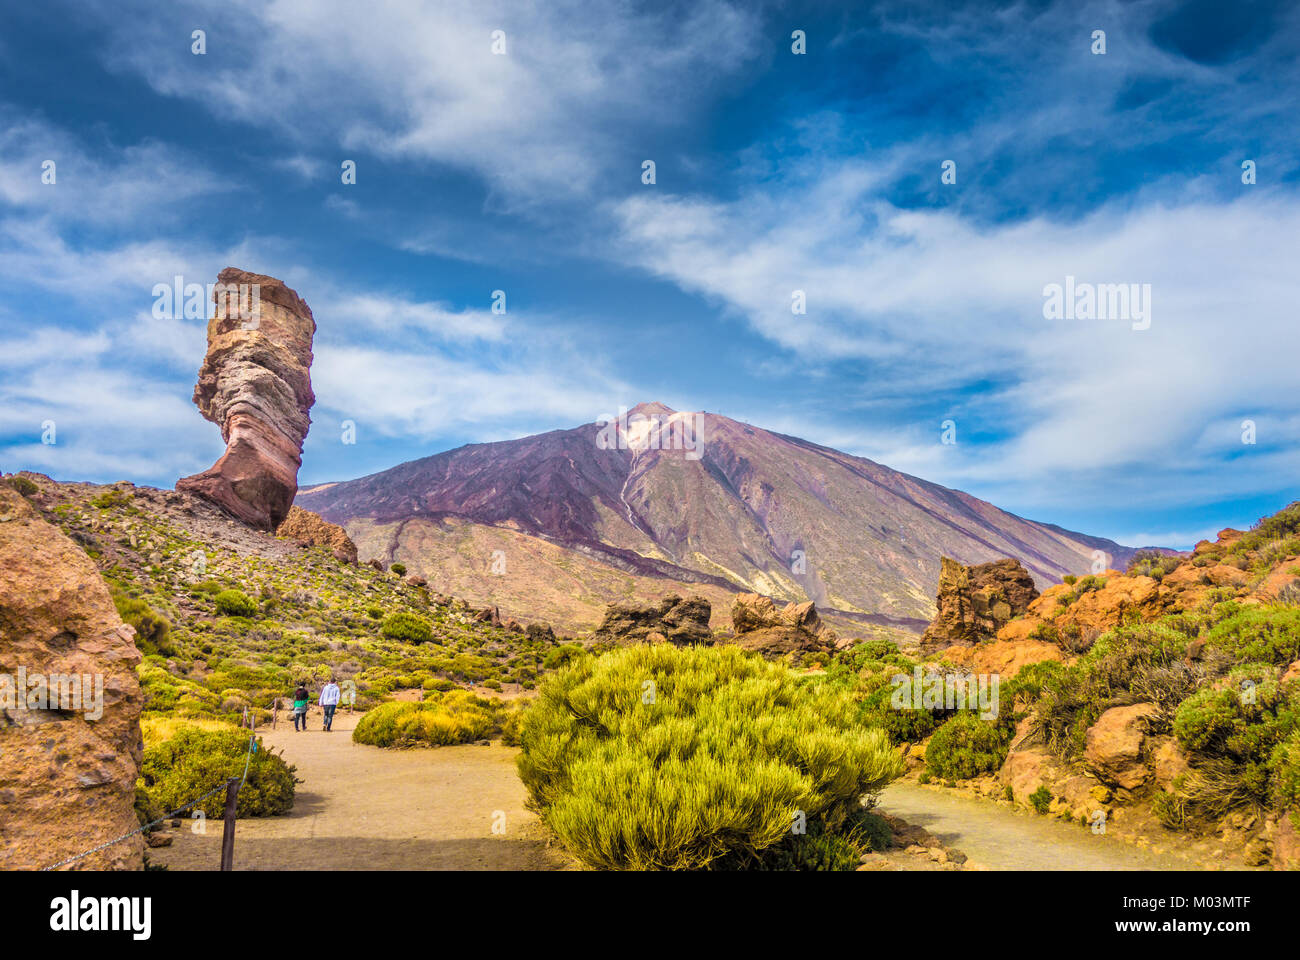 Roque Cinchado unique rock formation with famous Pico del Teide mountain volcano summit in the background on a sunny day, Tenerife, Canary Islands Stock Photo